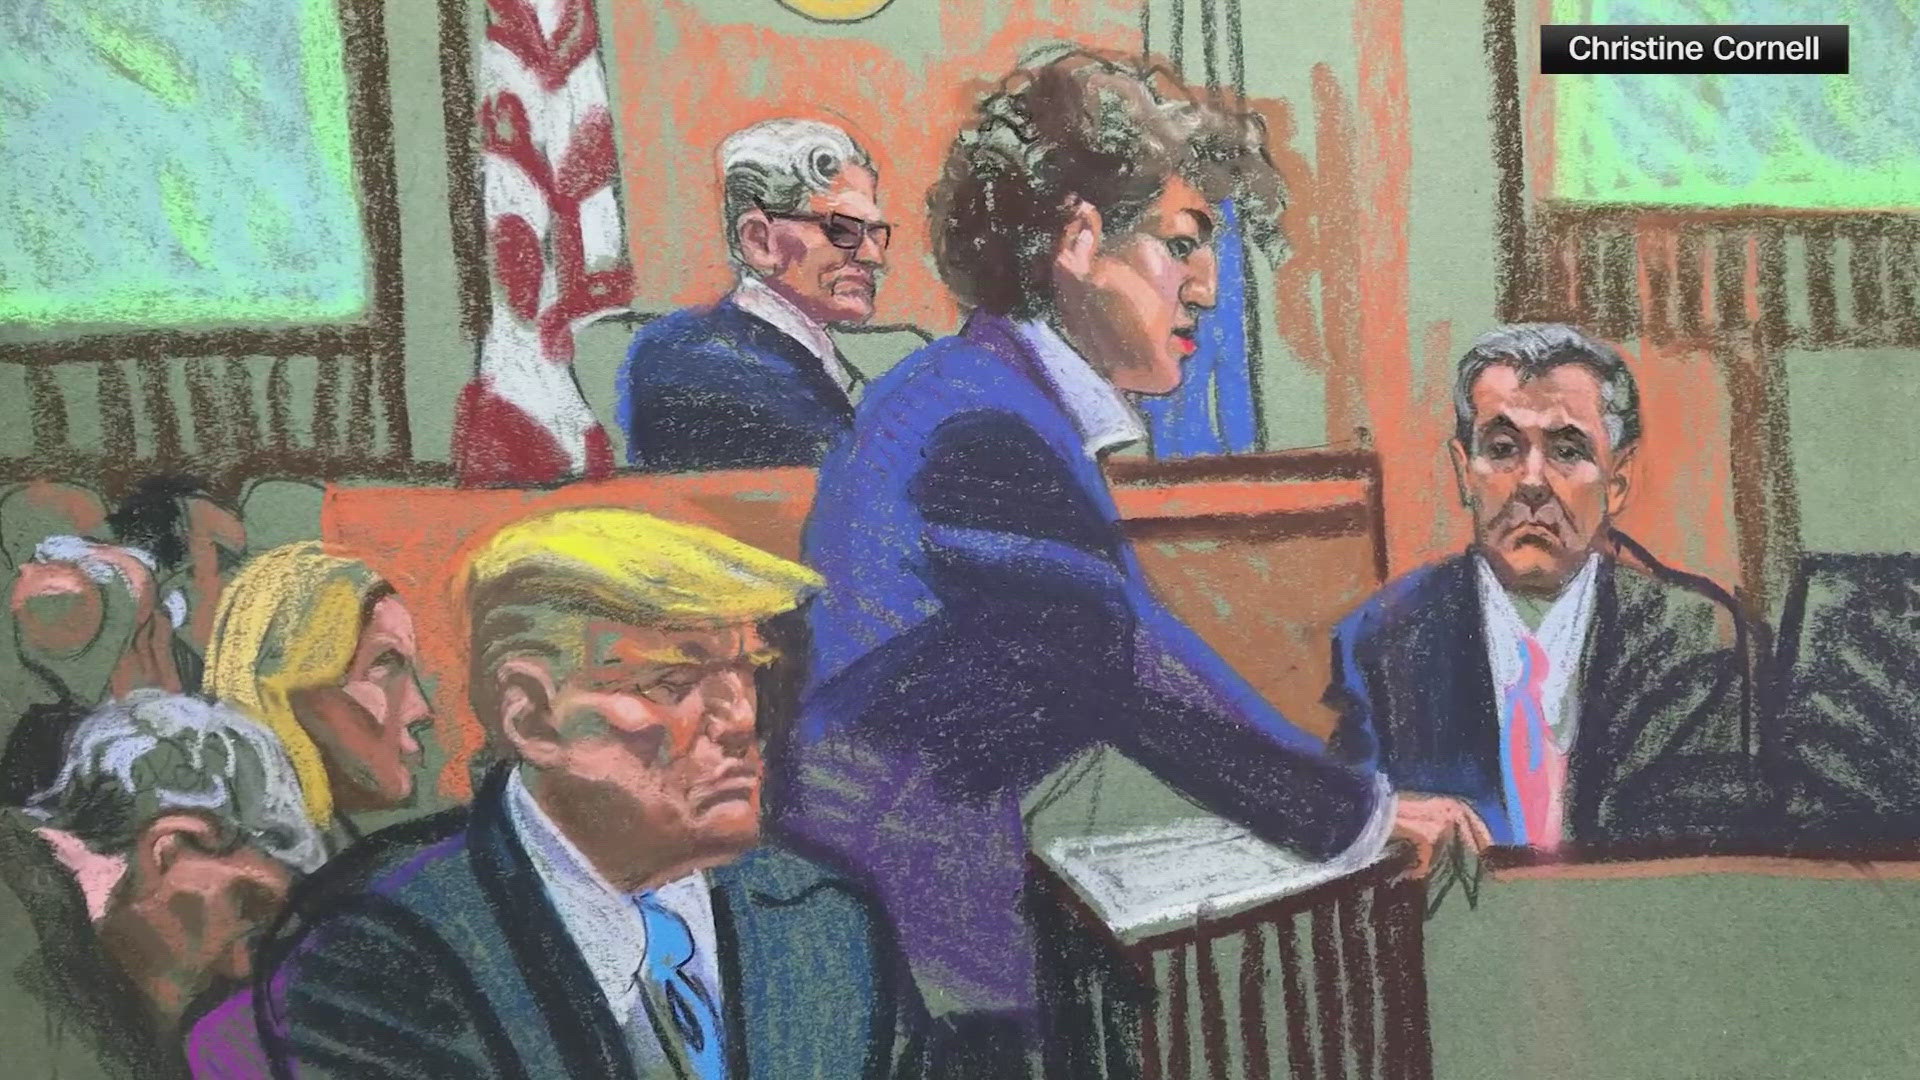 Prosecutors’ final witness, at least for now, was also their most important: Trump attorney-turned-adversary Michael Cohen.